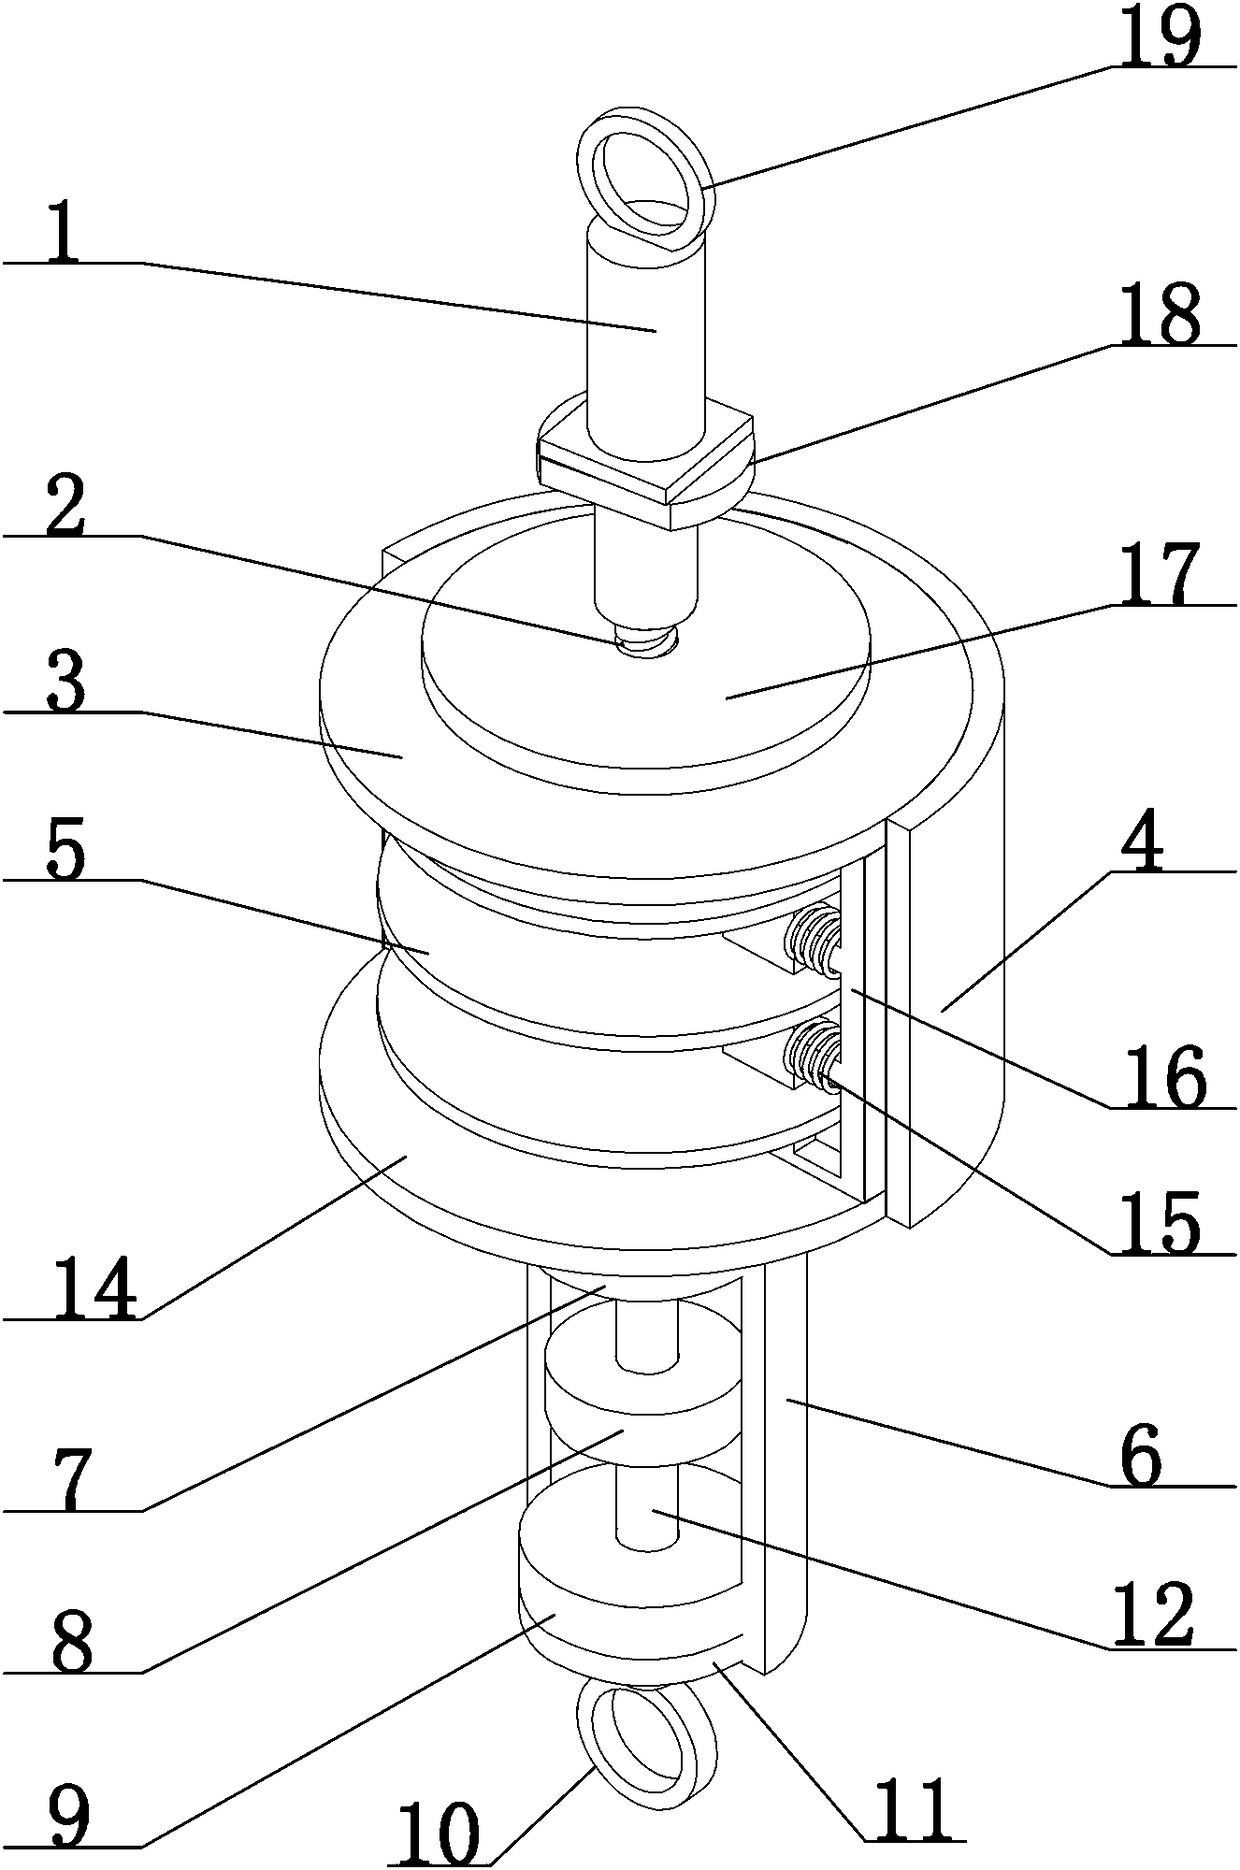 Three-element vibration damping device connecting damper element with inerter in parallel manner, design method of three-element vibration damping device and assembly method of three-element vibration damping device